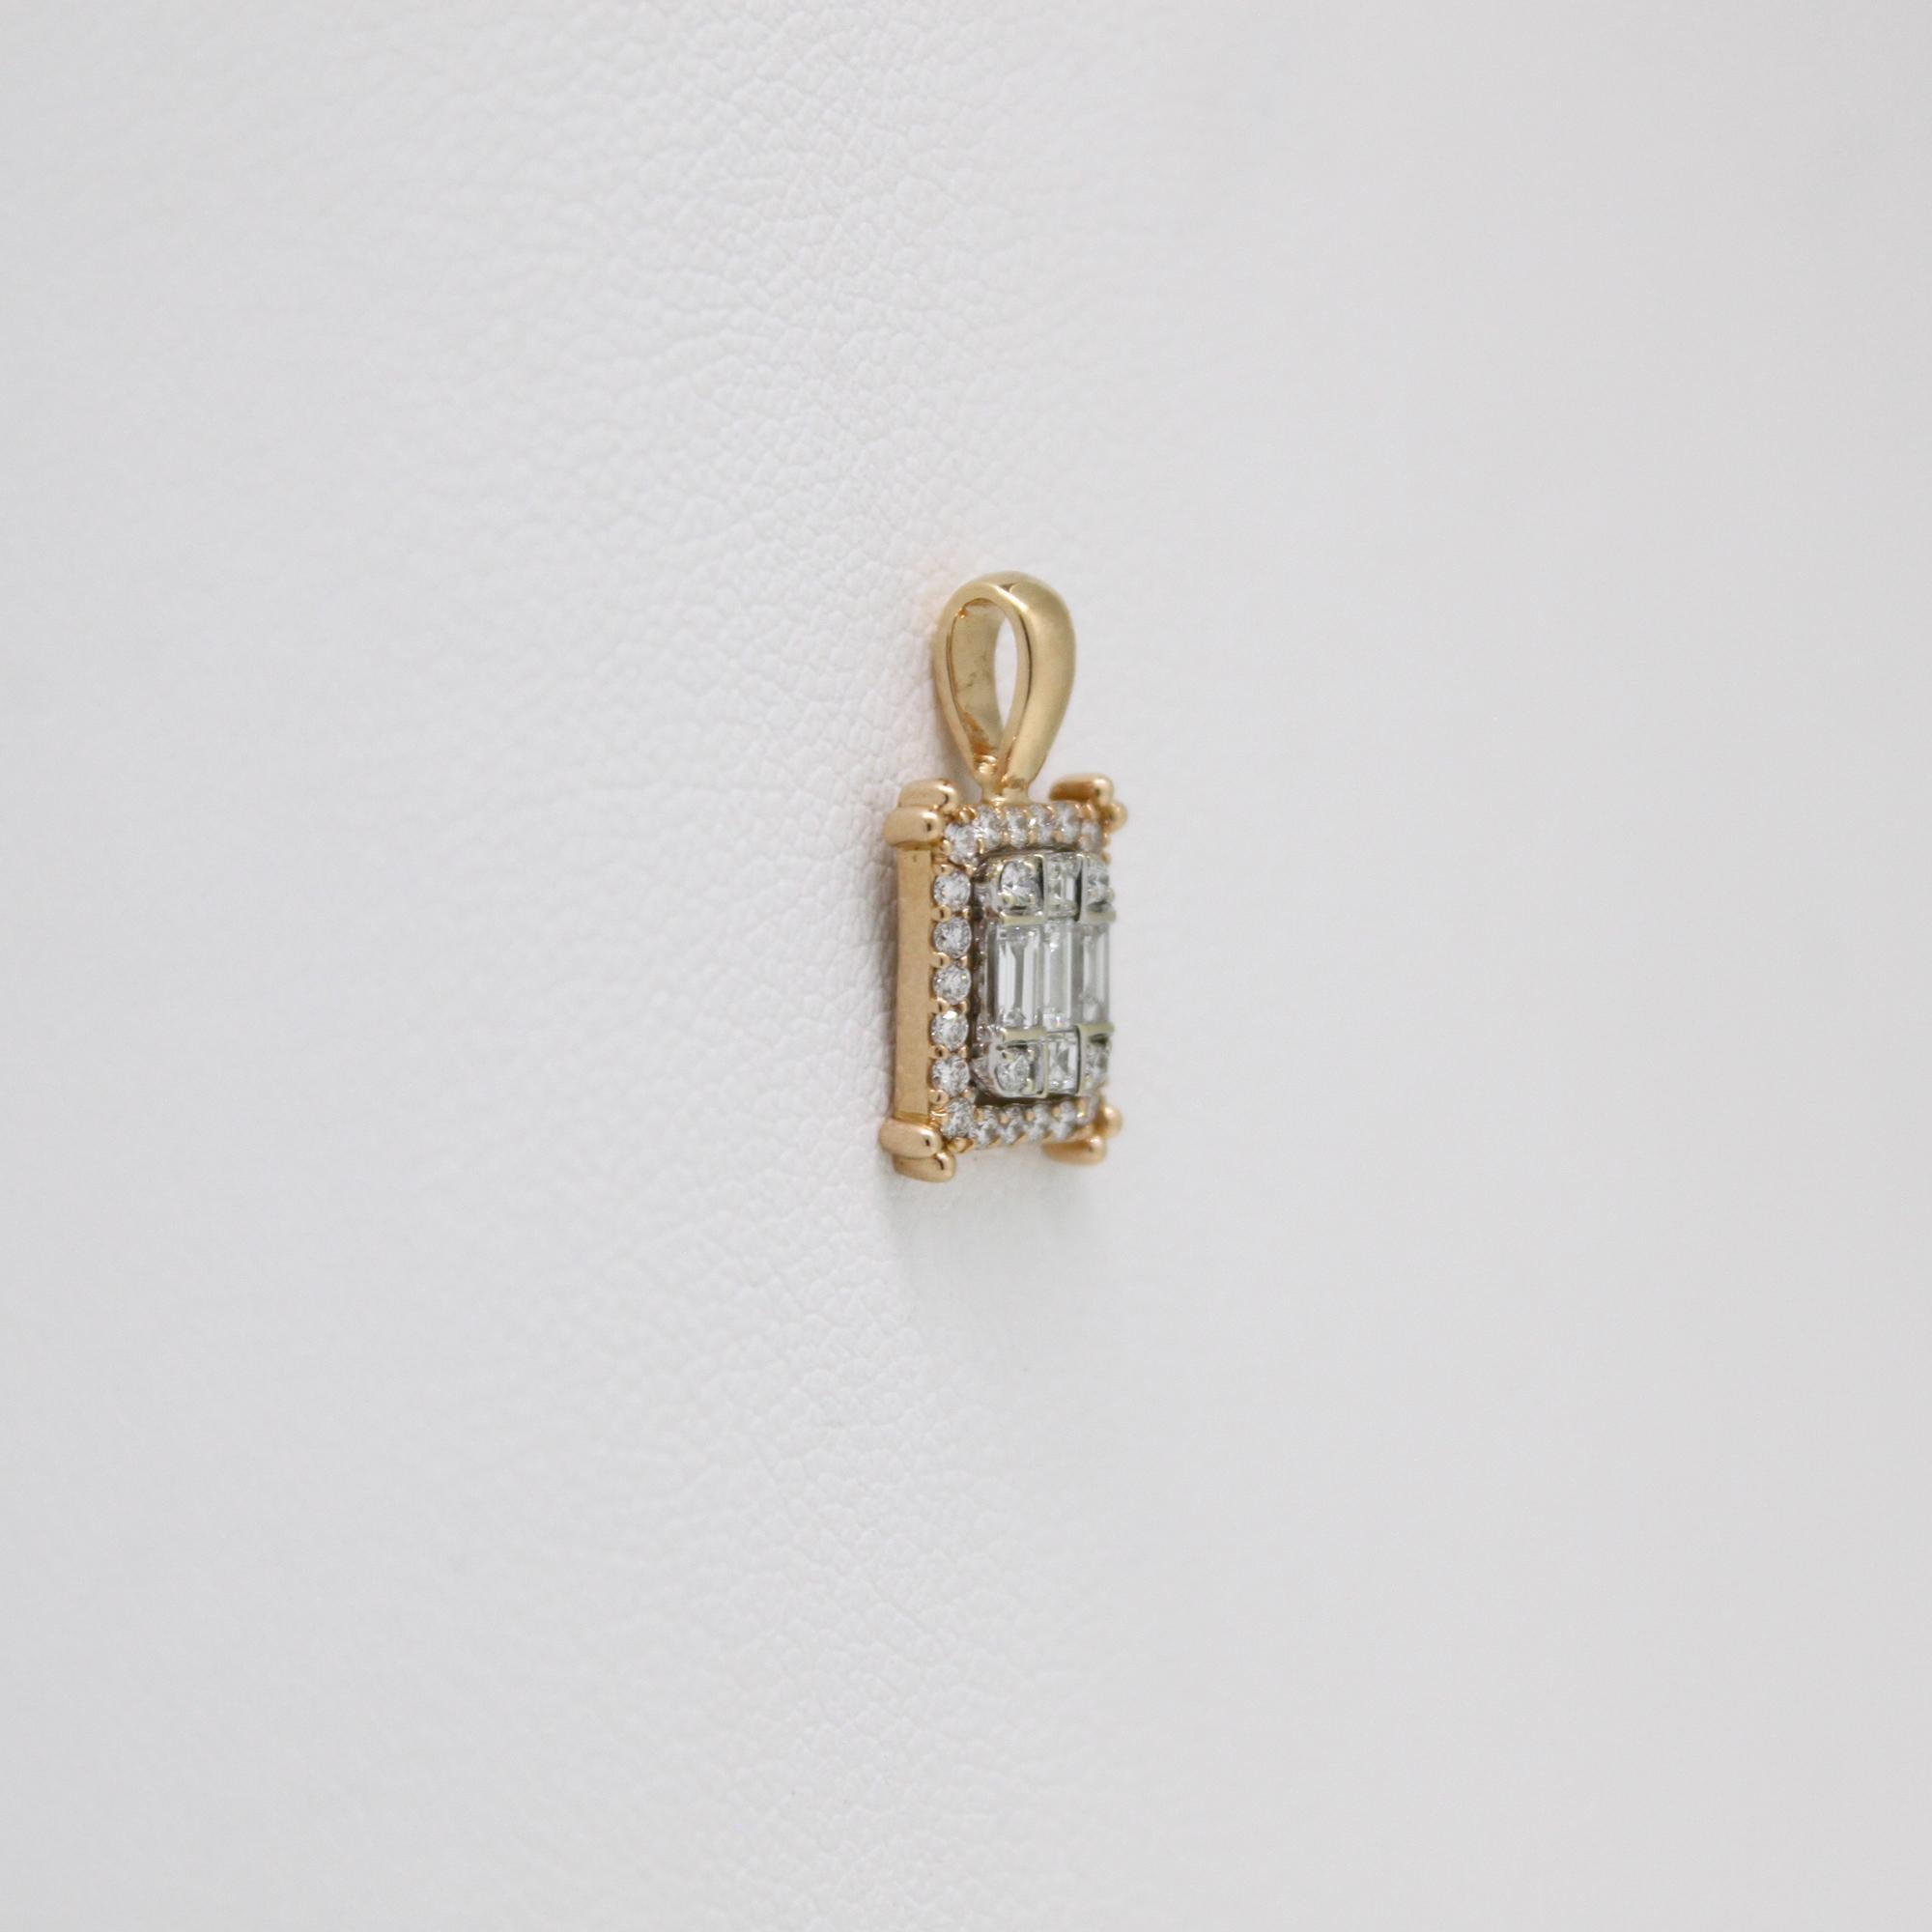 Total diamond weight: 0.33ct (VVS-VS. quality, G+ colour)
Total weight 1.02g
Material: 18K white gold
Chain available upon request.

Introducing the 